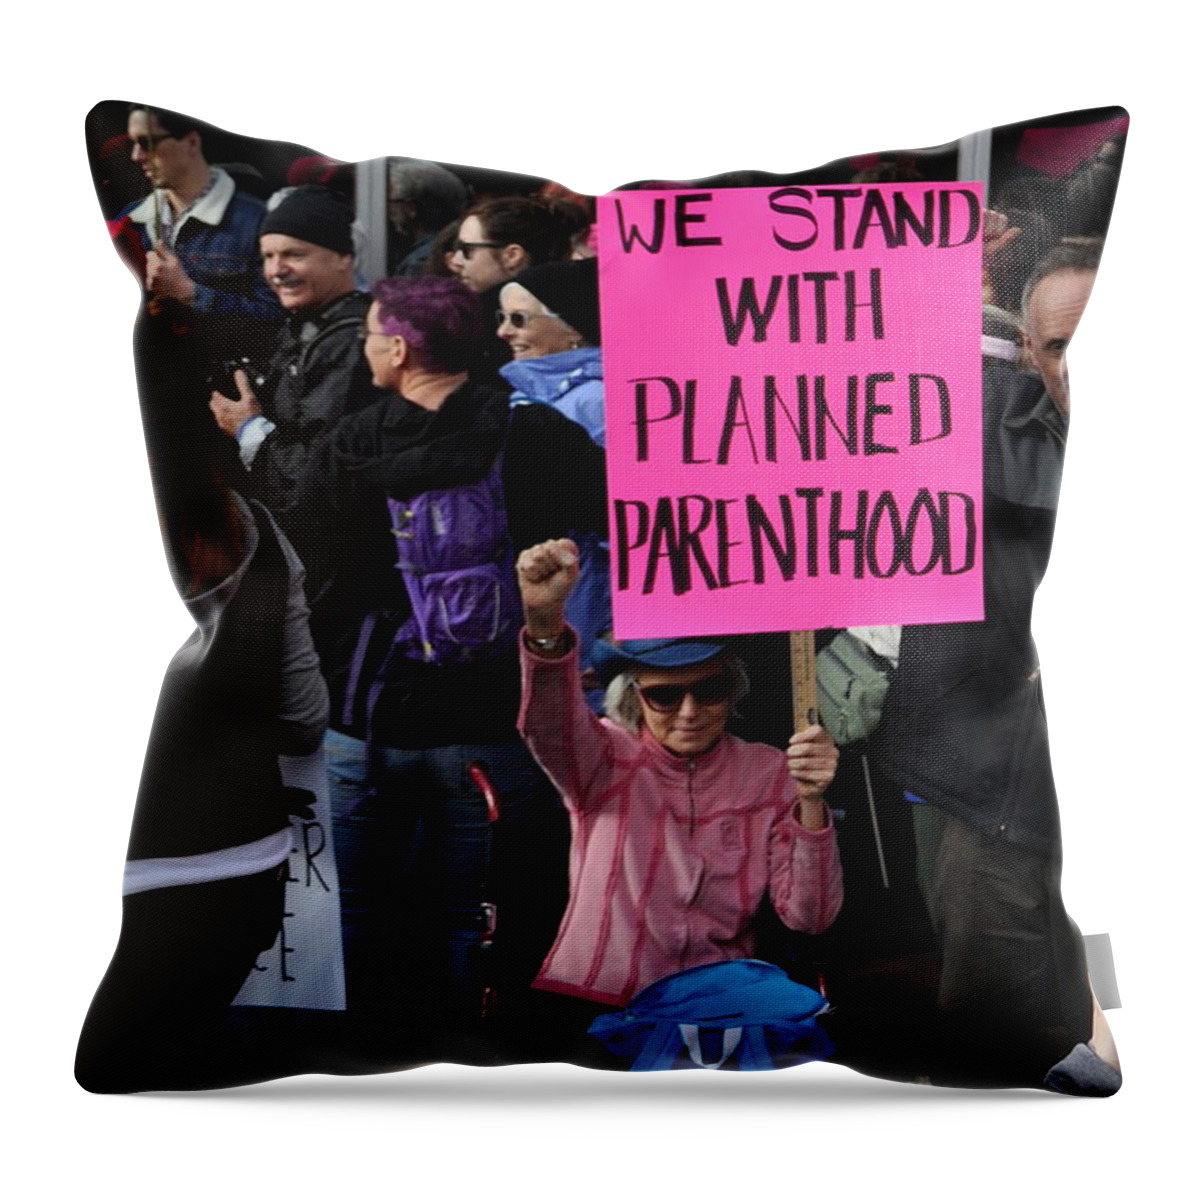 Planned Parenthood Throw Pillow featuring the photograph We Stand by Anjanette Douglas